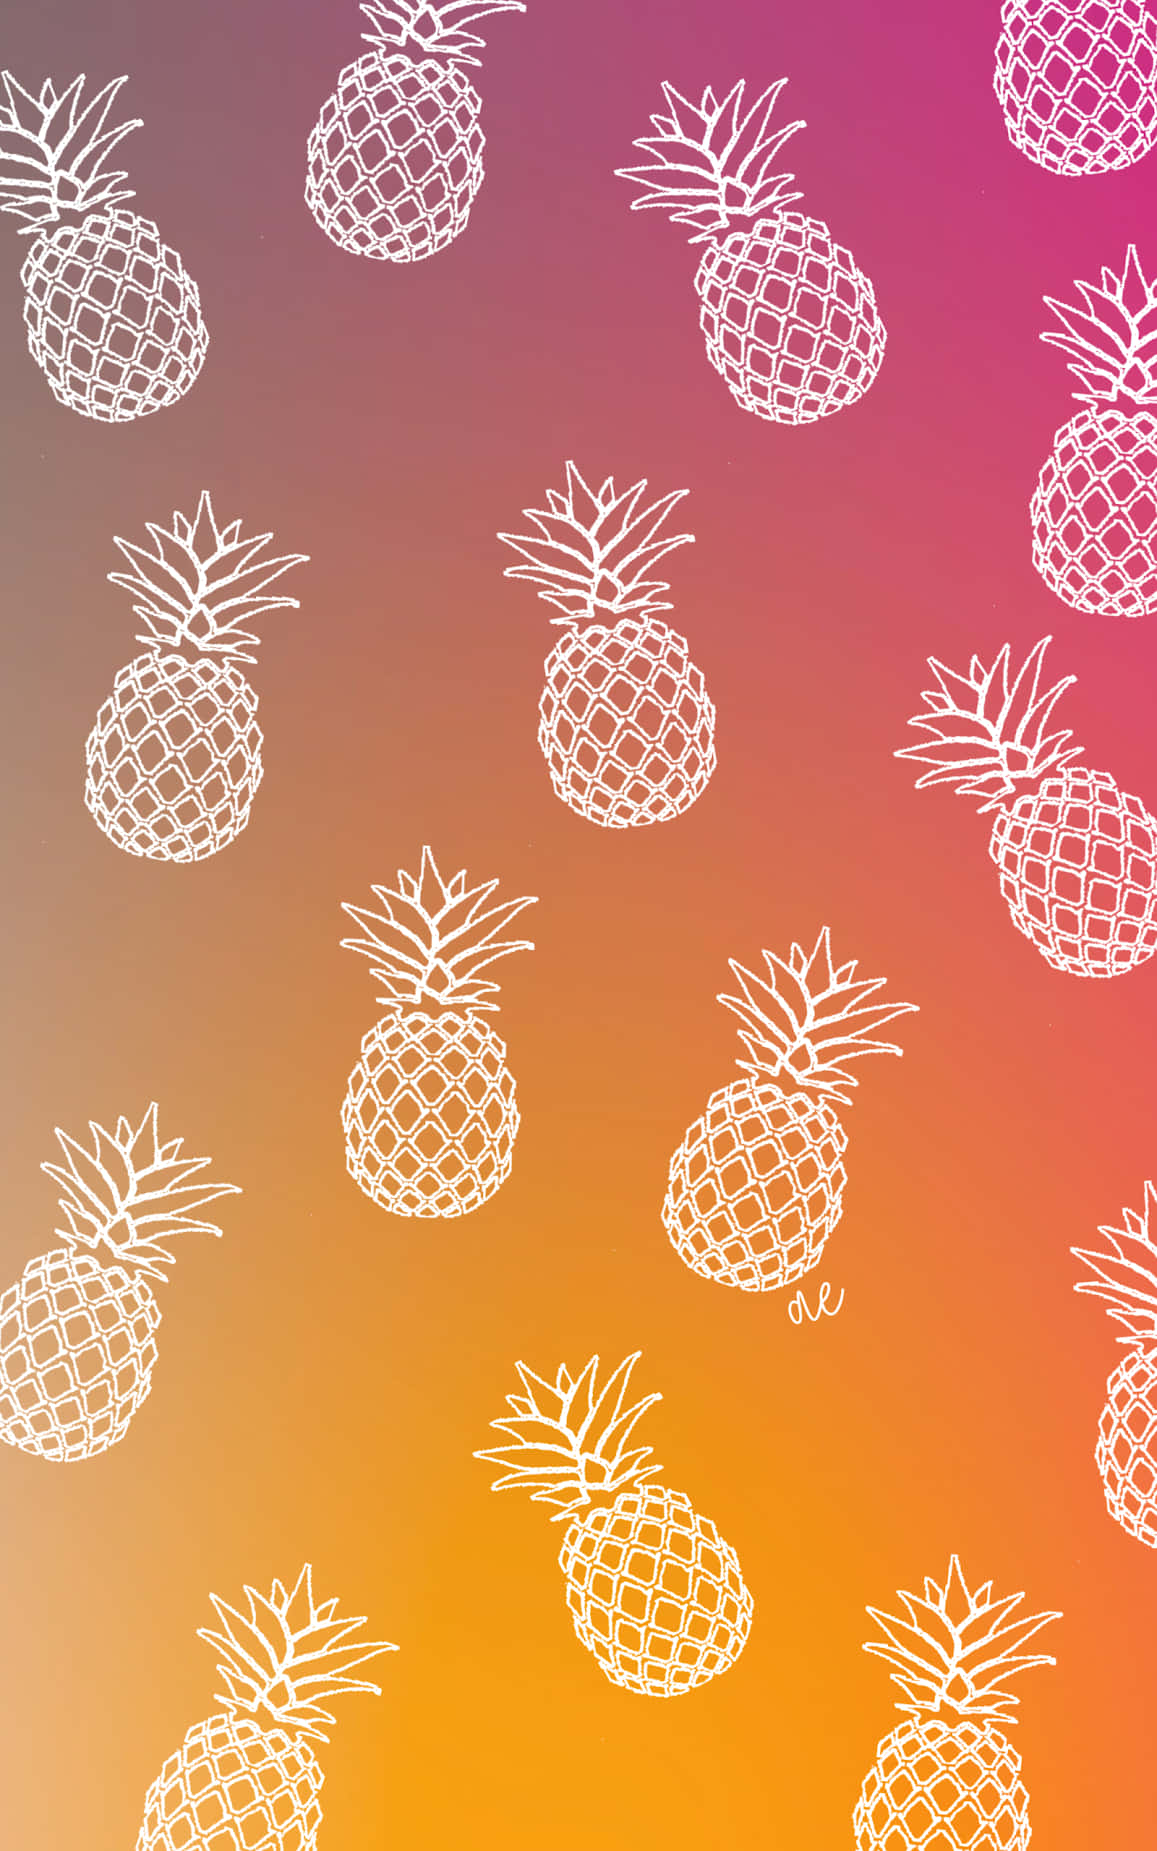 A refreshing, delicious pineapple on a wooden desktop Wallpaper